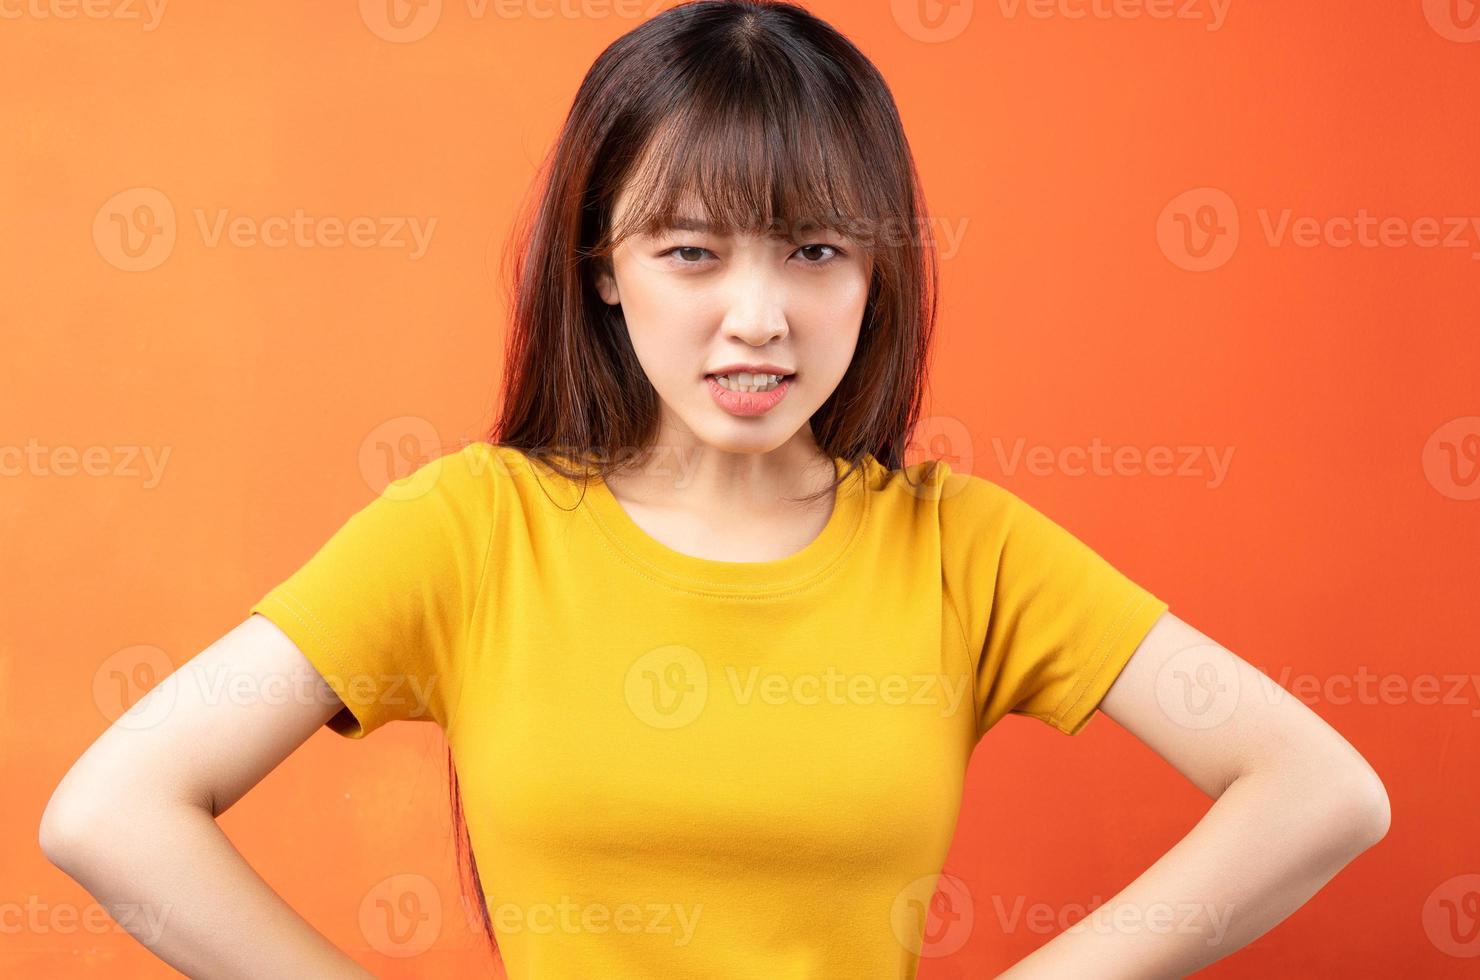 Image of young Asian woman wearing yellow t-shirt on orange background photo